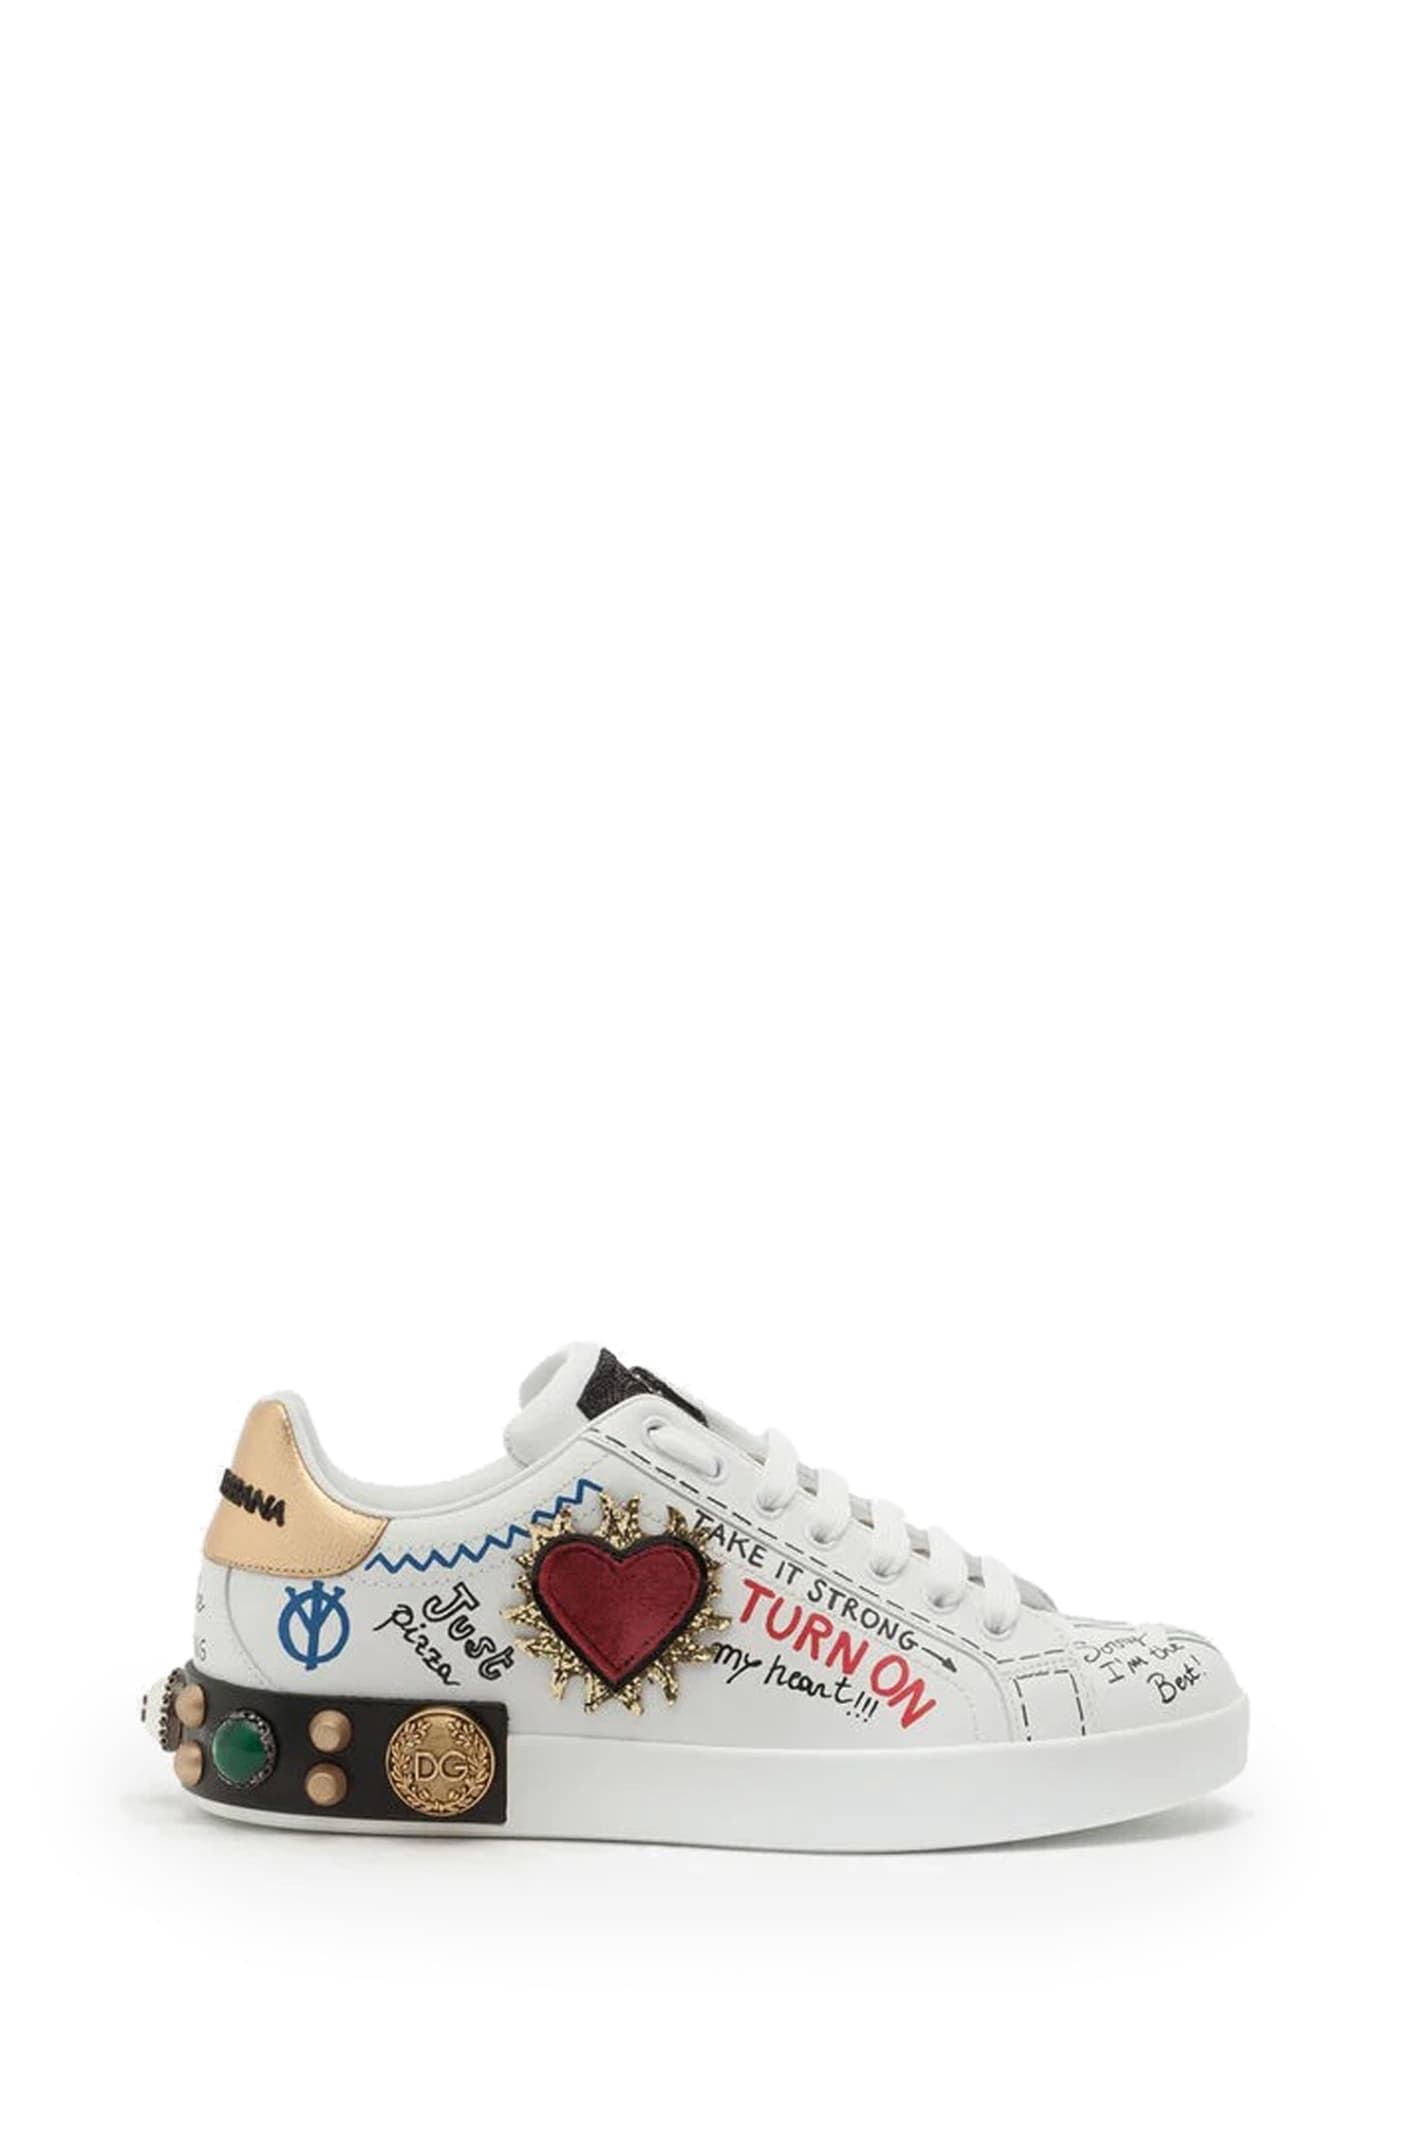 Dolce & Gabbana Printed Calfskin Nappa Portofino Sneakers With Parch And Embroidery